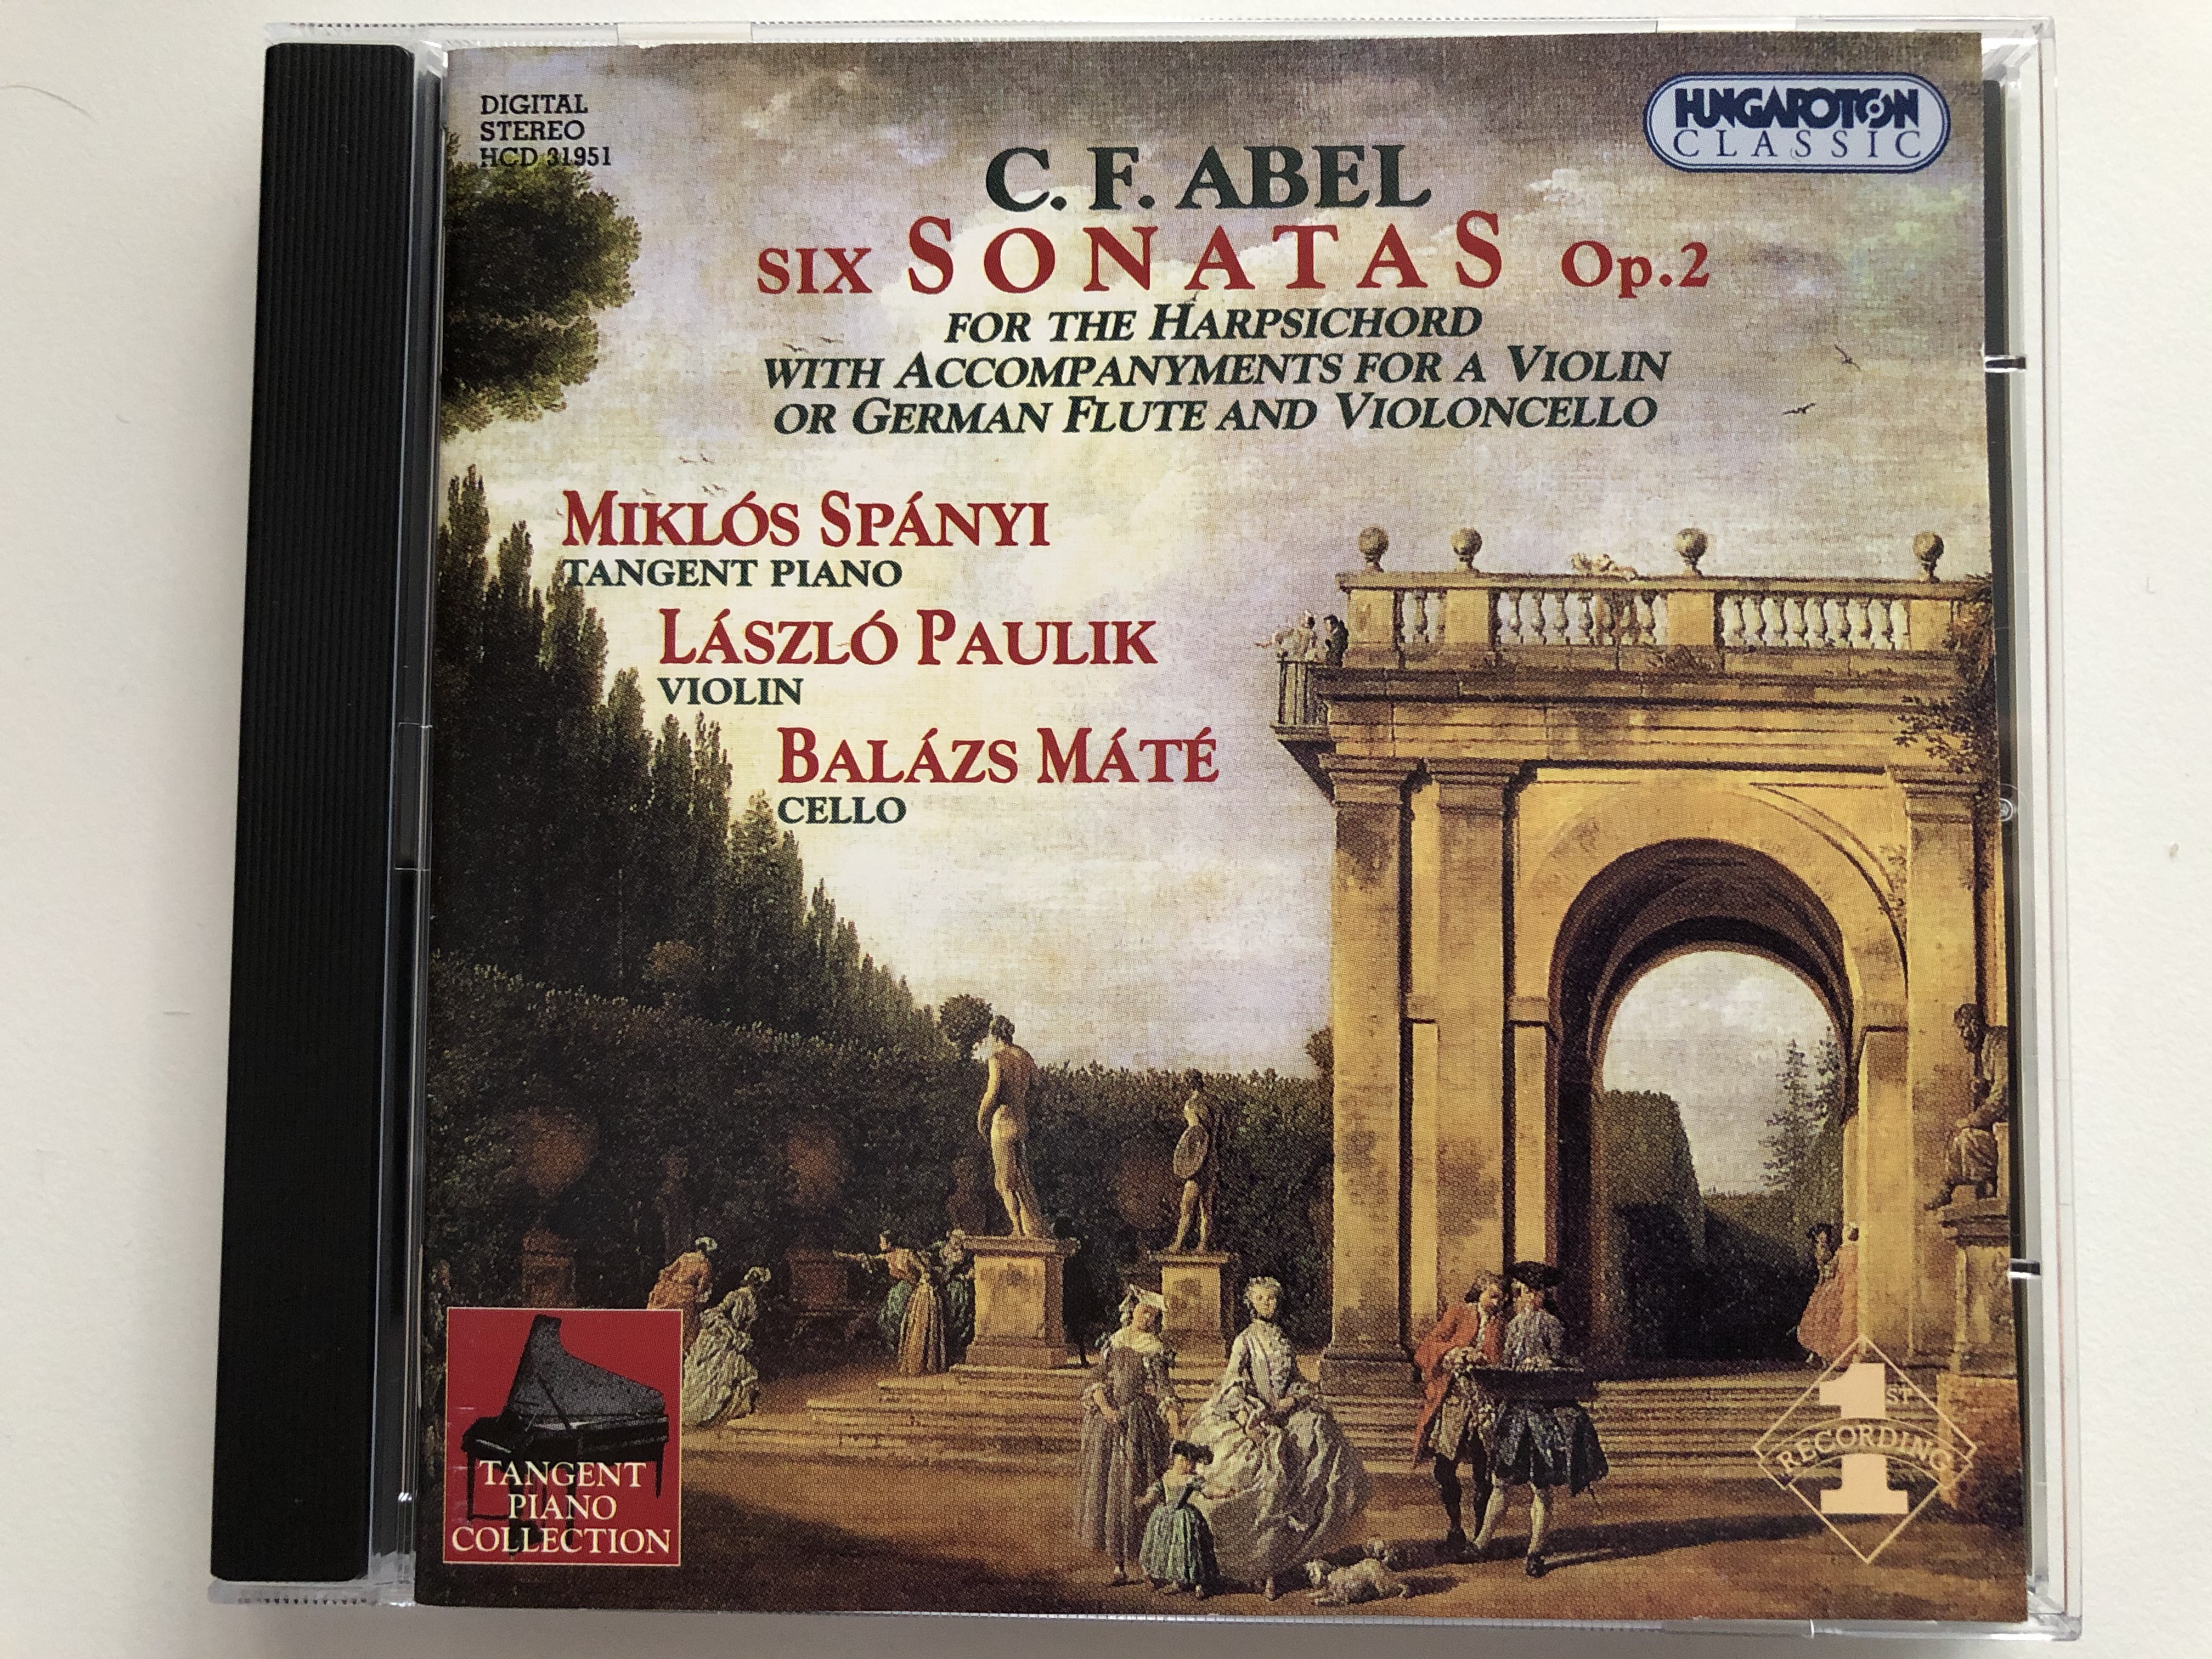 c.-f.-abel-six-sonatas-op.-2-for-the-harpsichord-with-accompanyments-for-a-violin-or-german-flute-and-violoncello-miklos-spanyi-tangent-piano-laszlo-paulik-violin-hungaroton-classi-1-.jpg